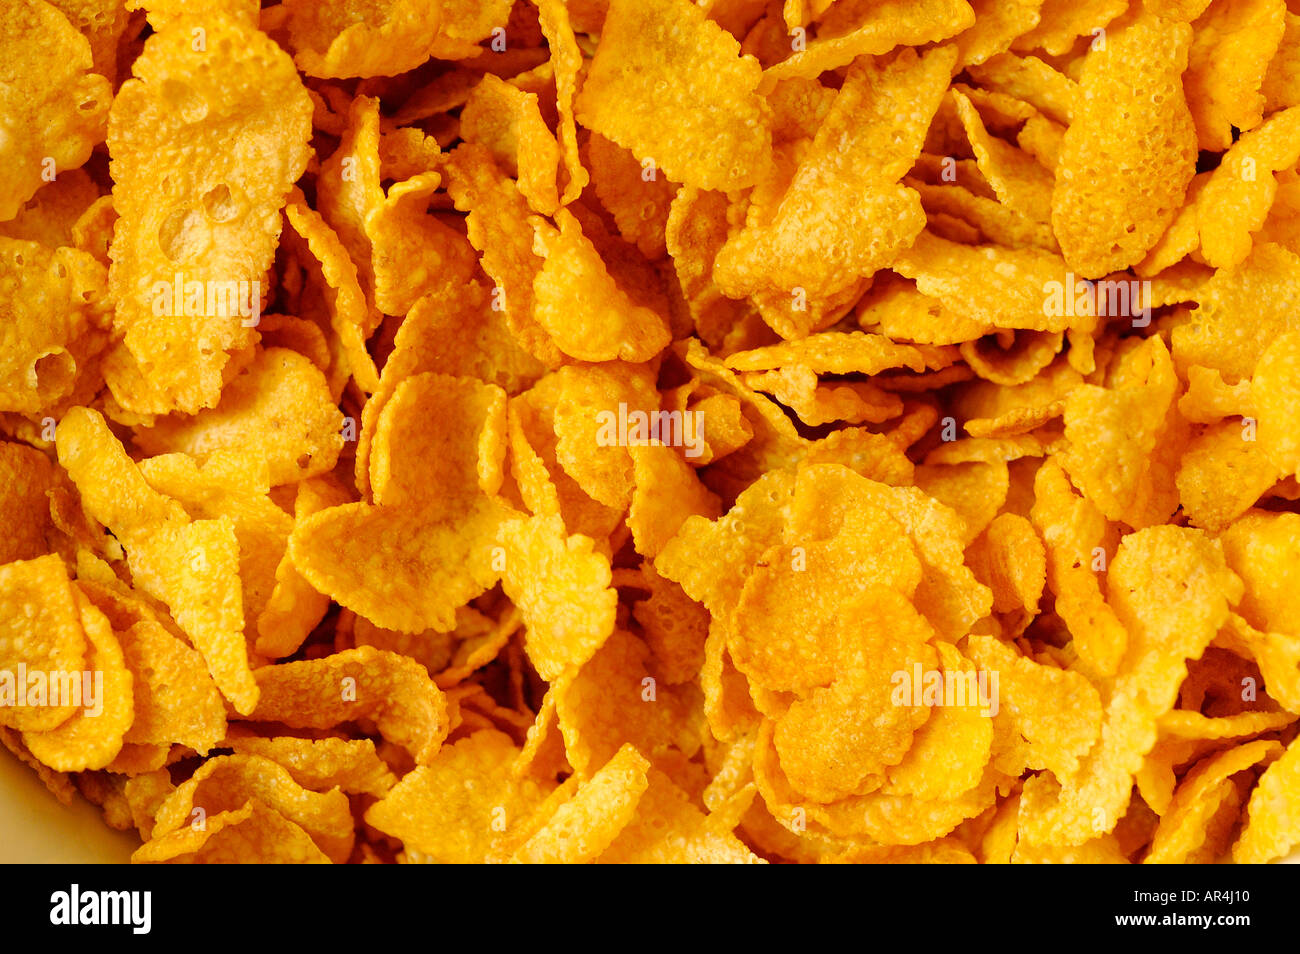 Corn flakes cereal Stock Photo